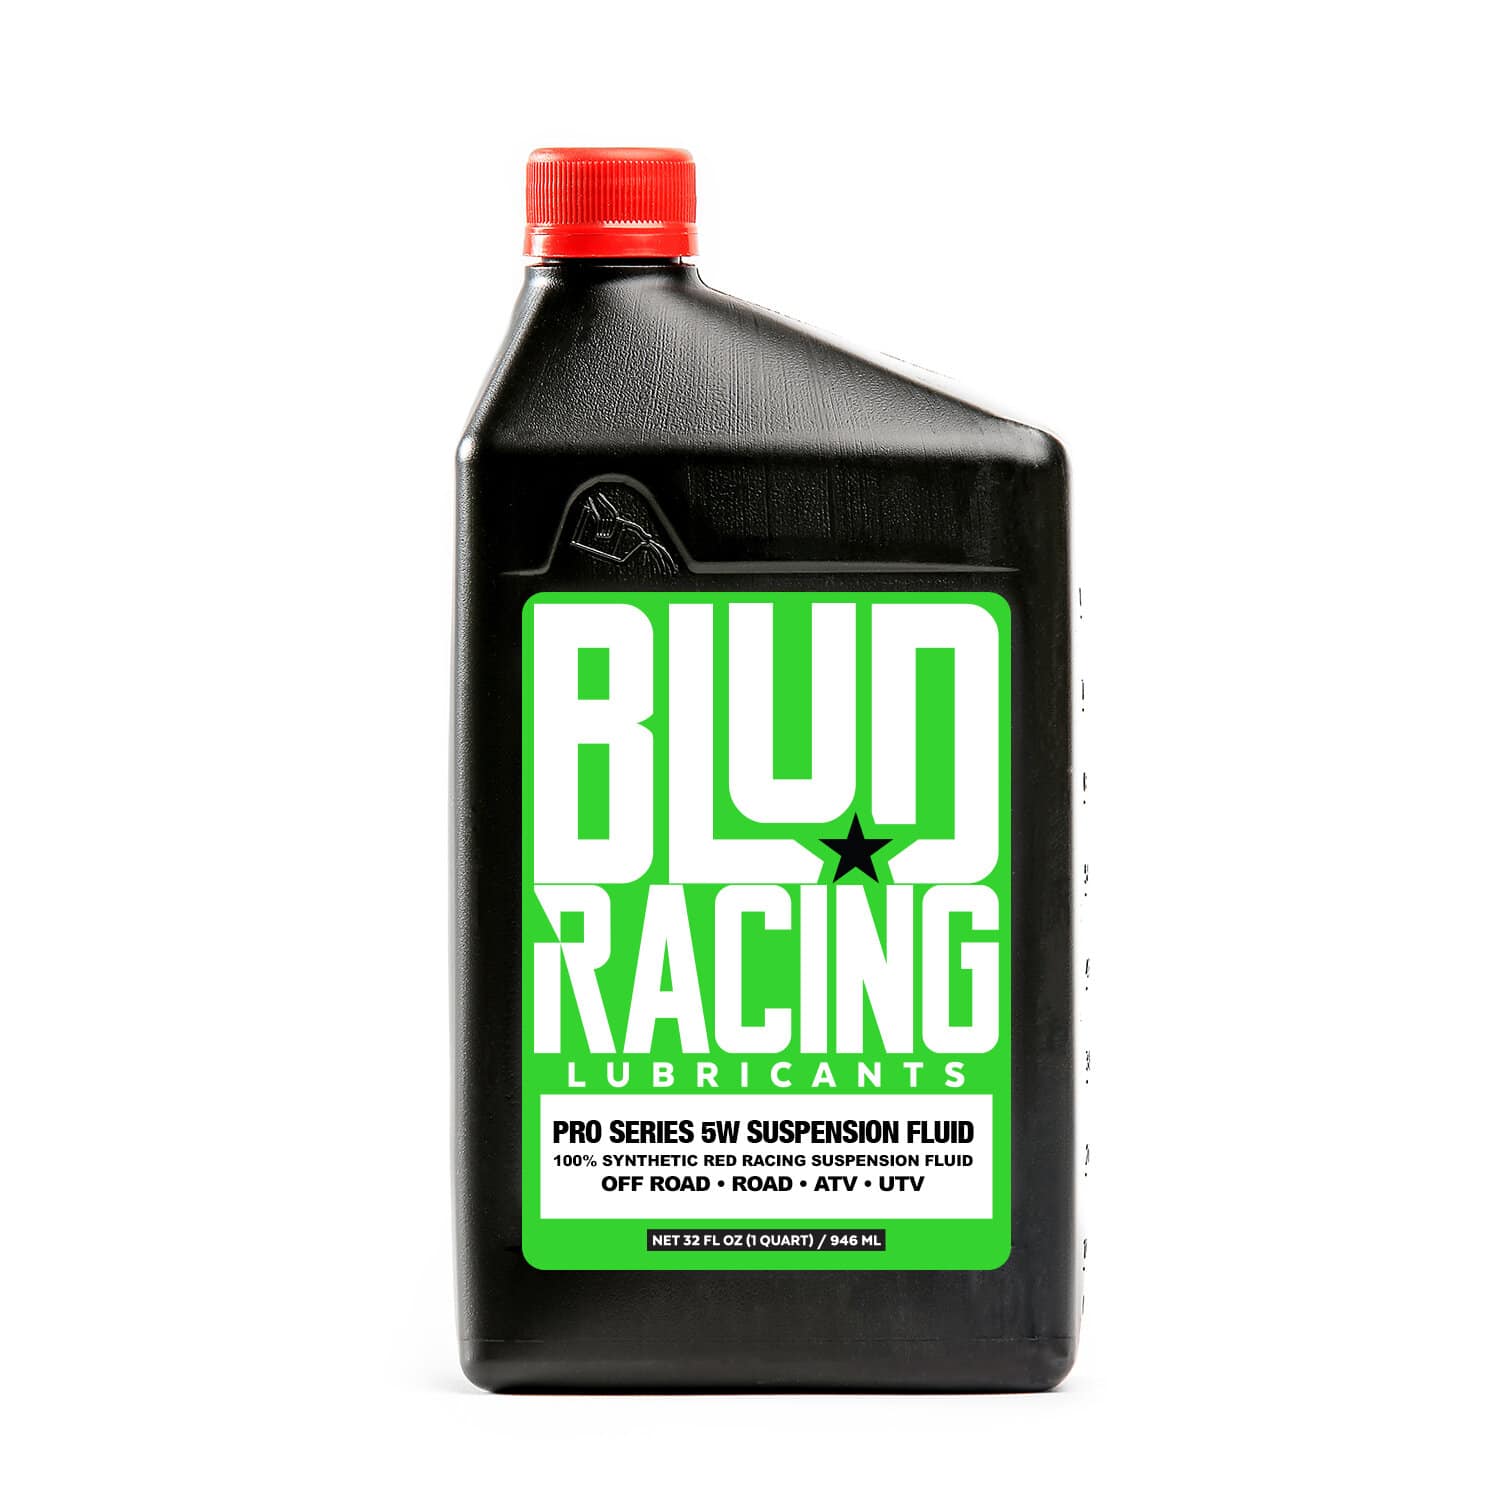 PRO SERIES 5W SUSPENSION FLUID for a smoother suspension